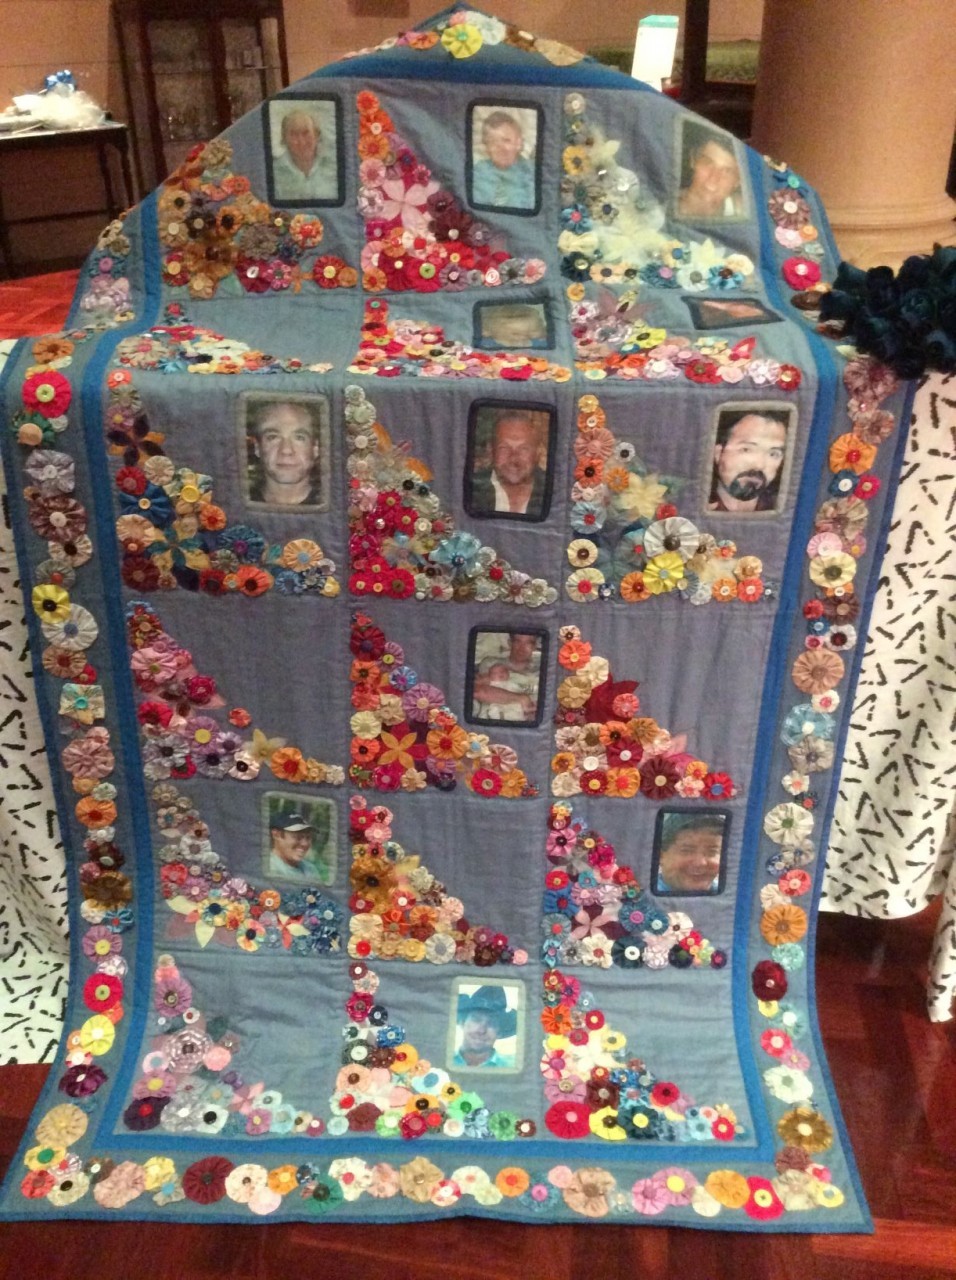 The Life-Quilt - in memory of lives lost in South Australian workplaces